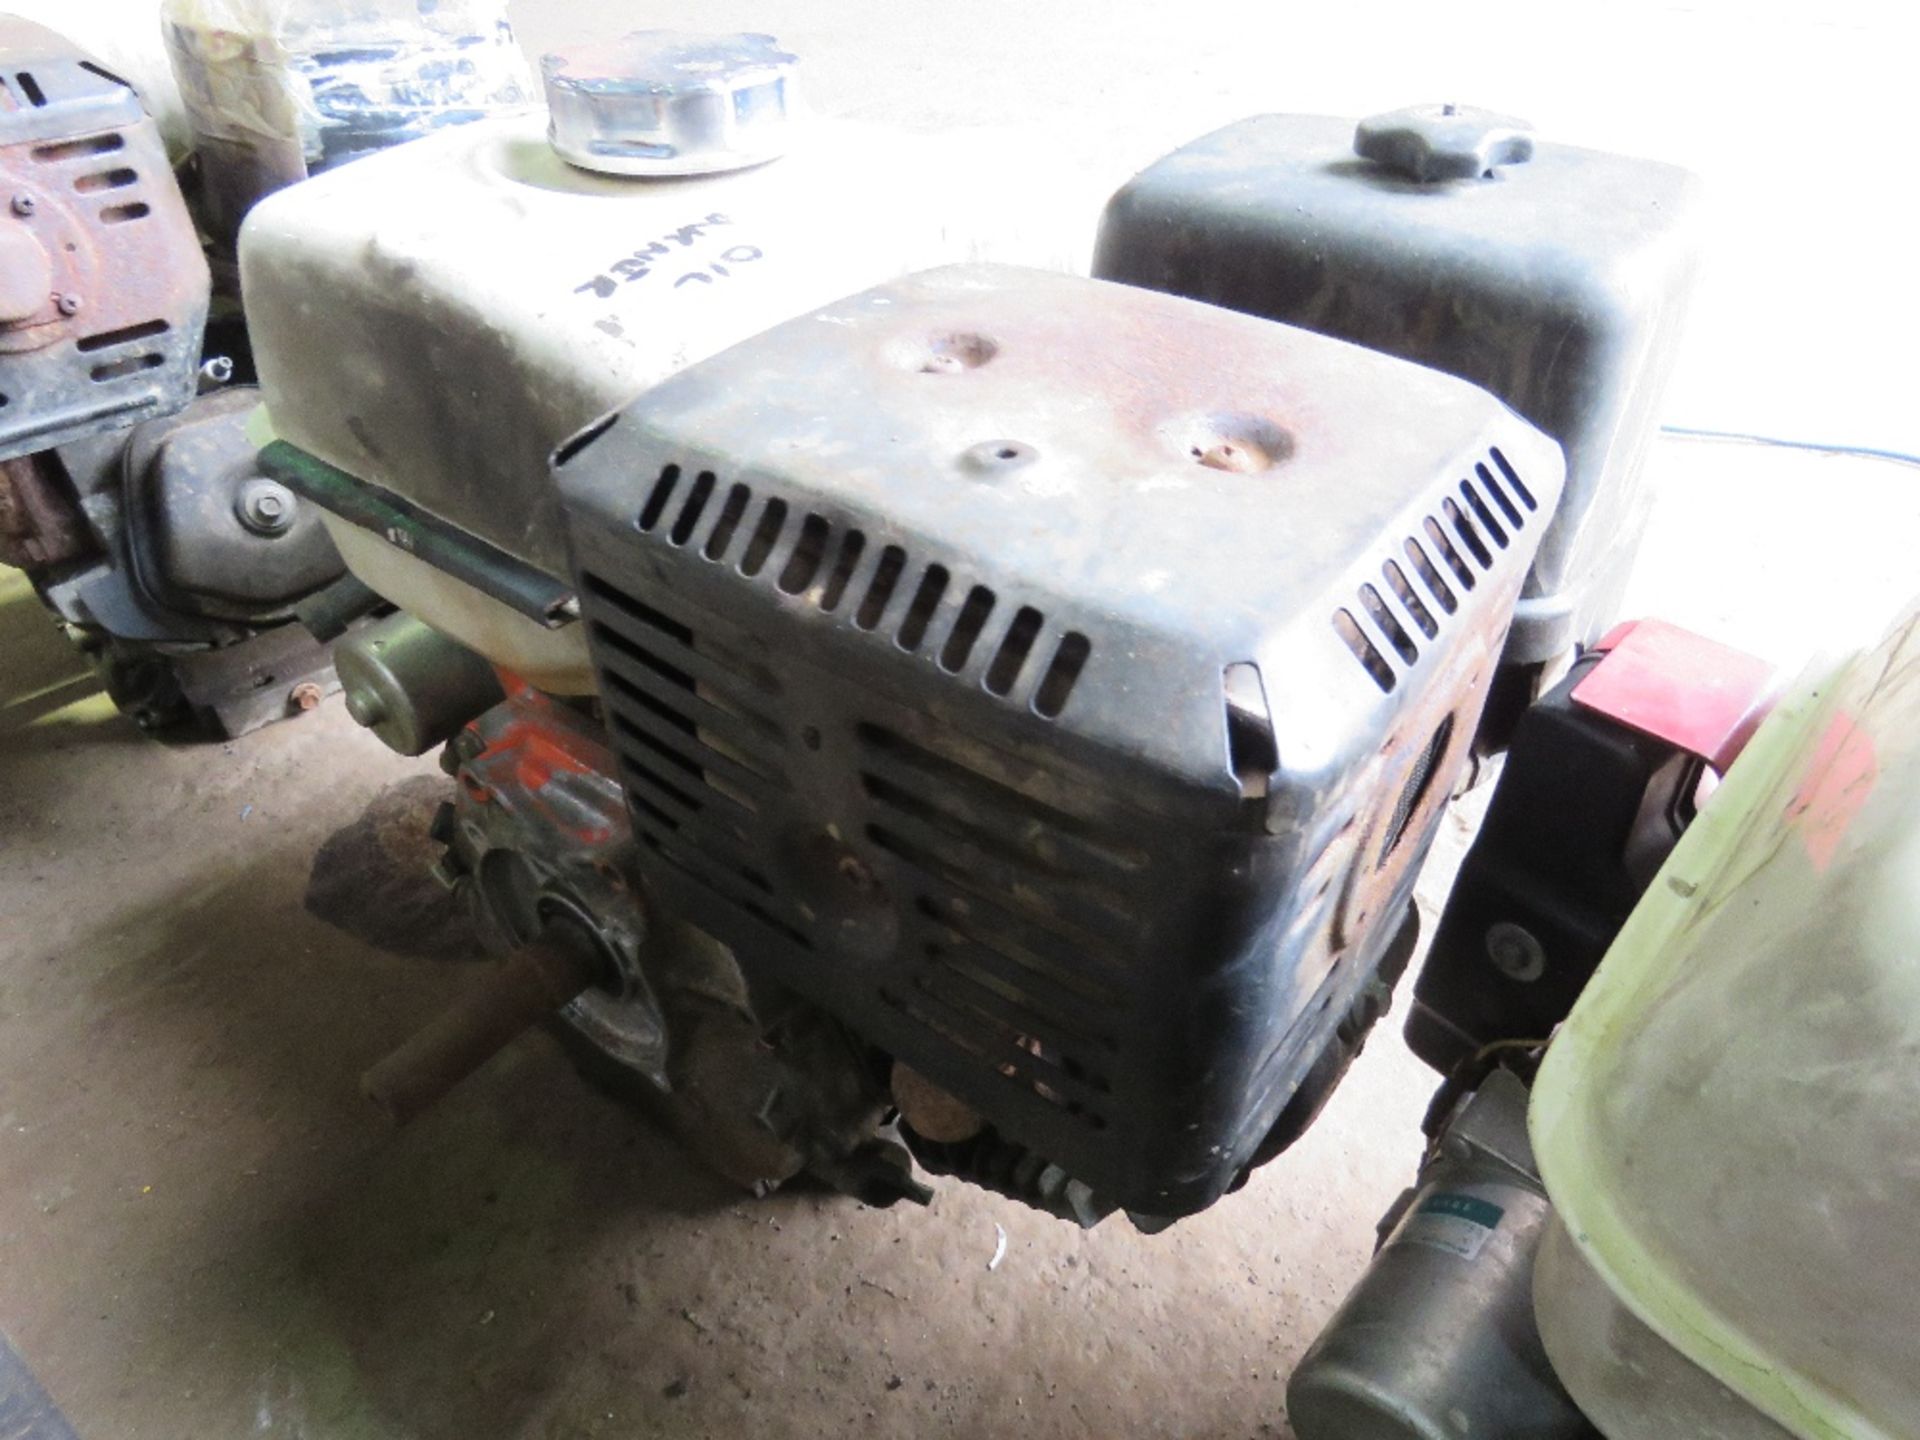 HONDA GX390 ELECTRIC START PETROL ENGINE, CONDITION UNKNOWN. - Image 2 of 3